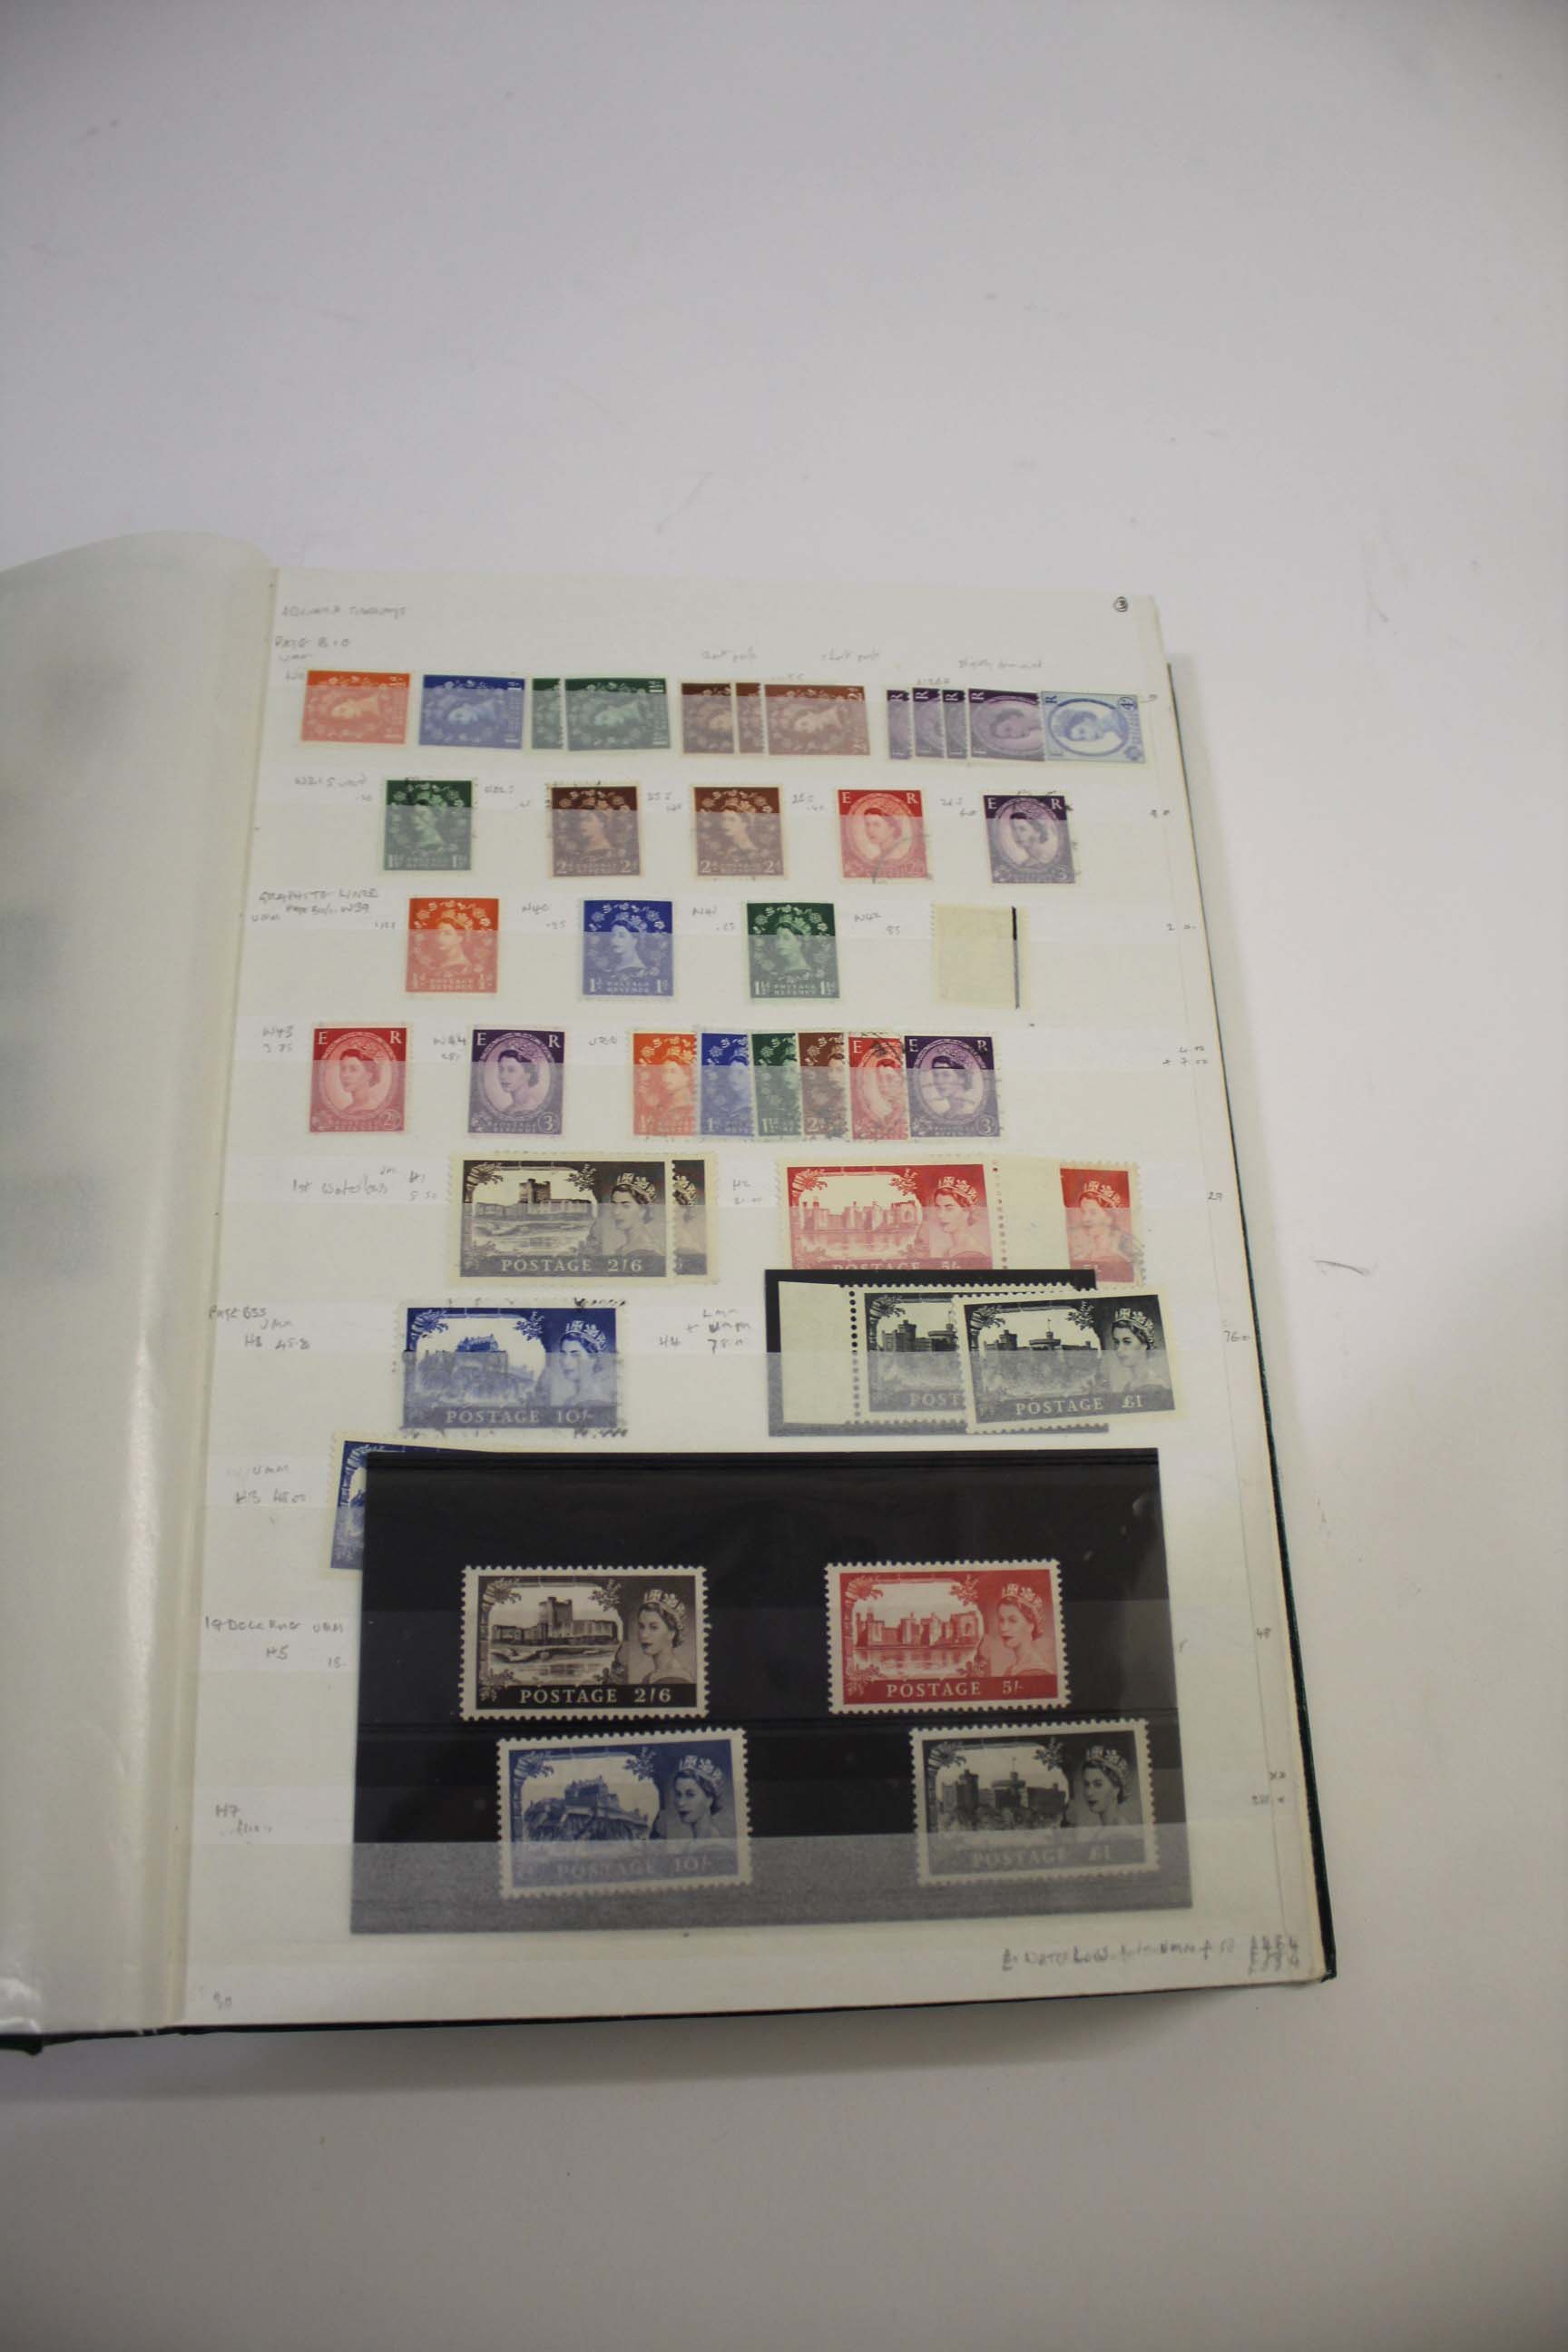 GREAT BRITAIN STAMPS a green stock book with Great Britain from 1952 Wildings U/M and used,